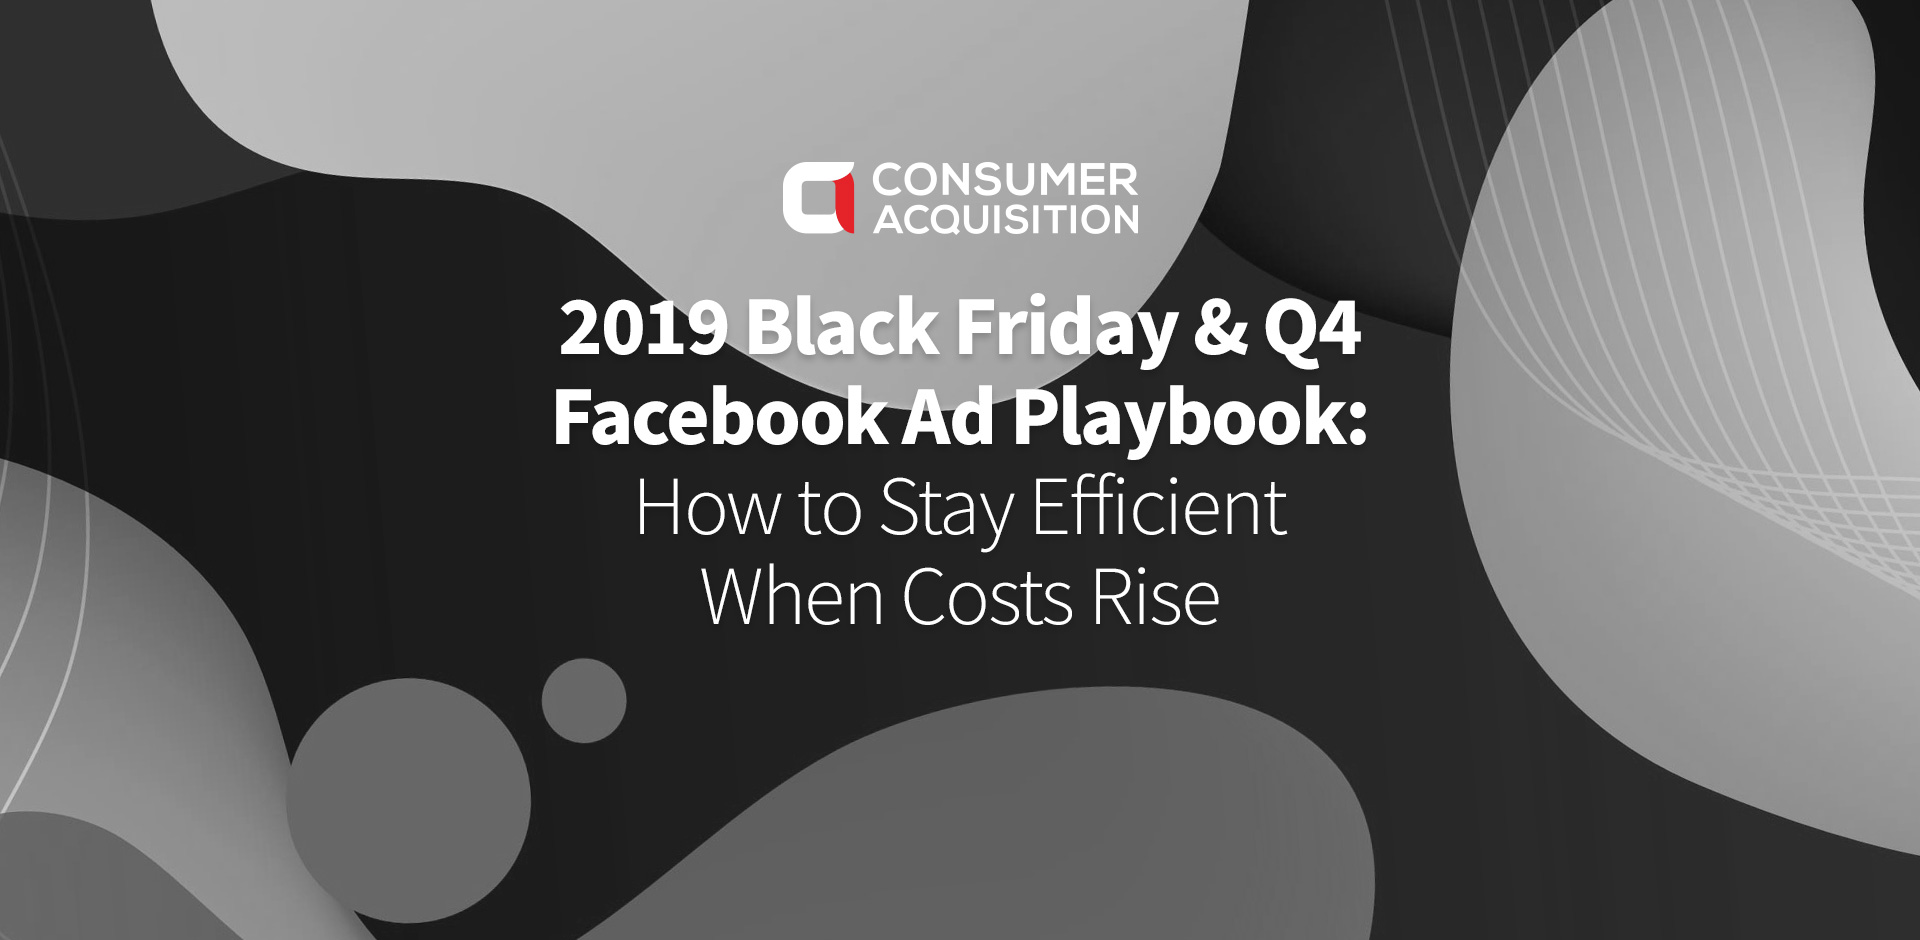 2019 Black Friday & Q4 Facebook Ad Playbook: How to Stay Efficient When Costs Rise